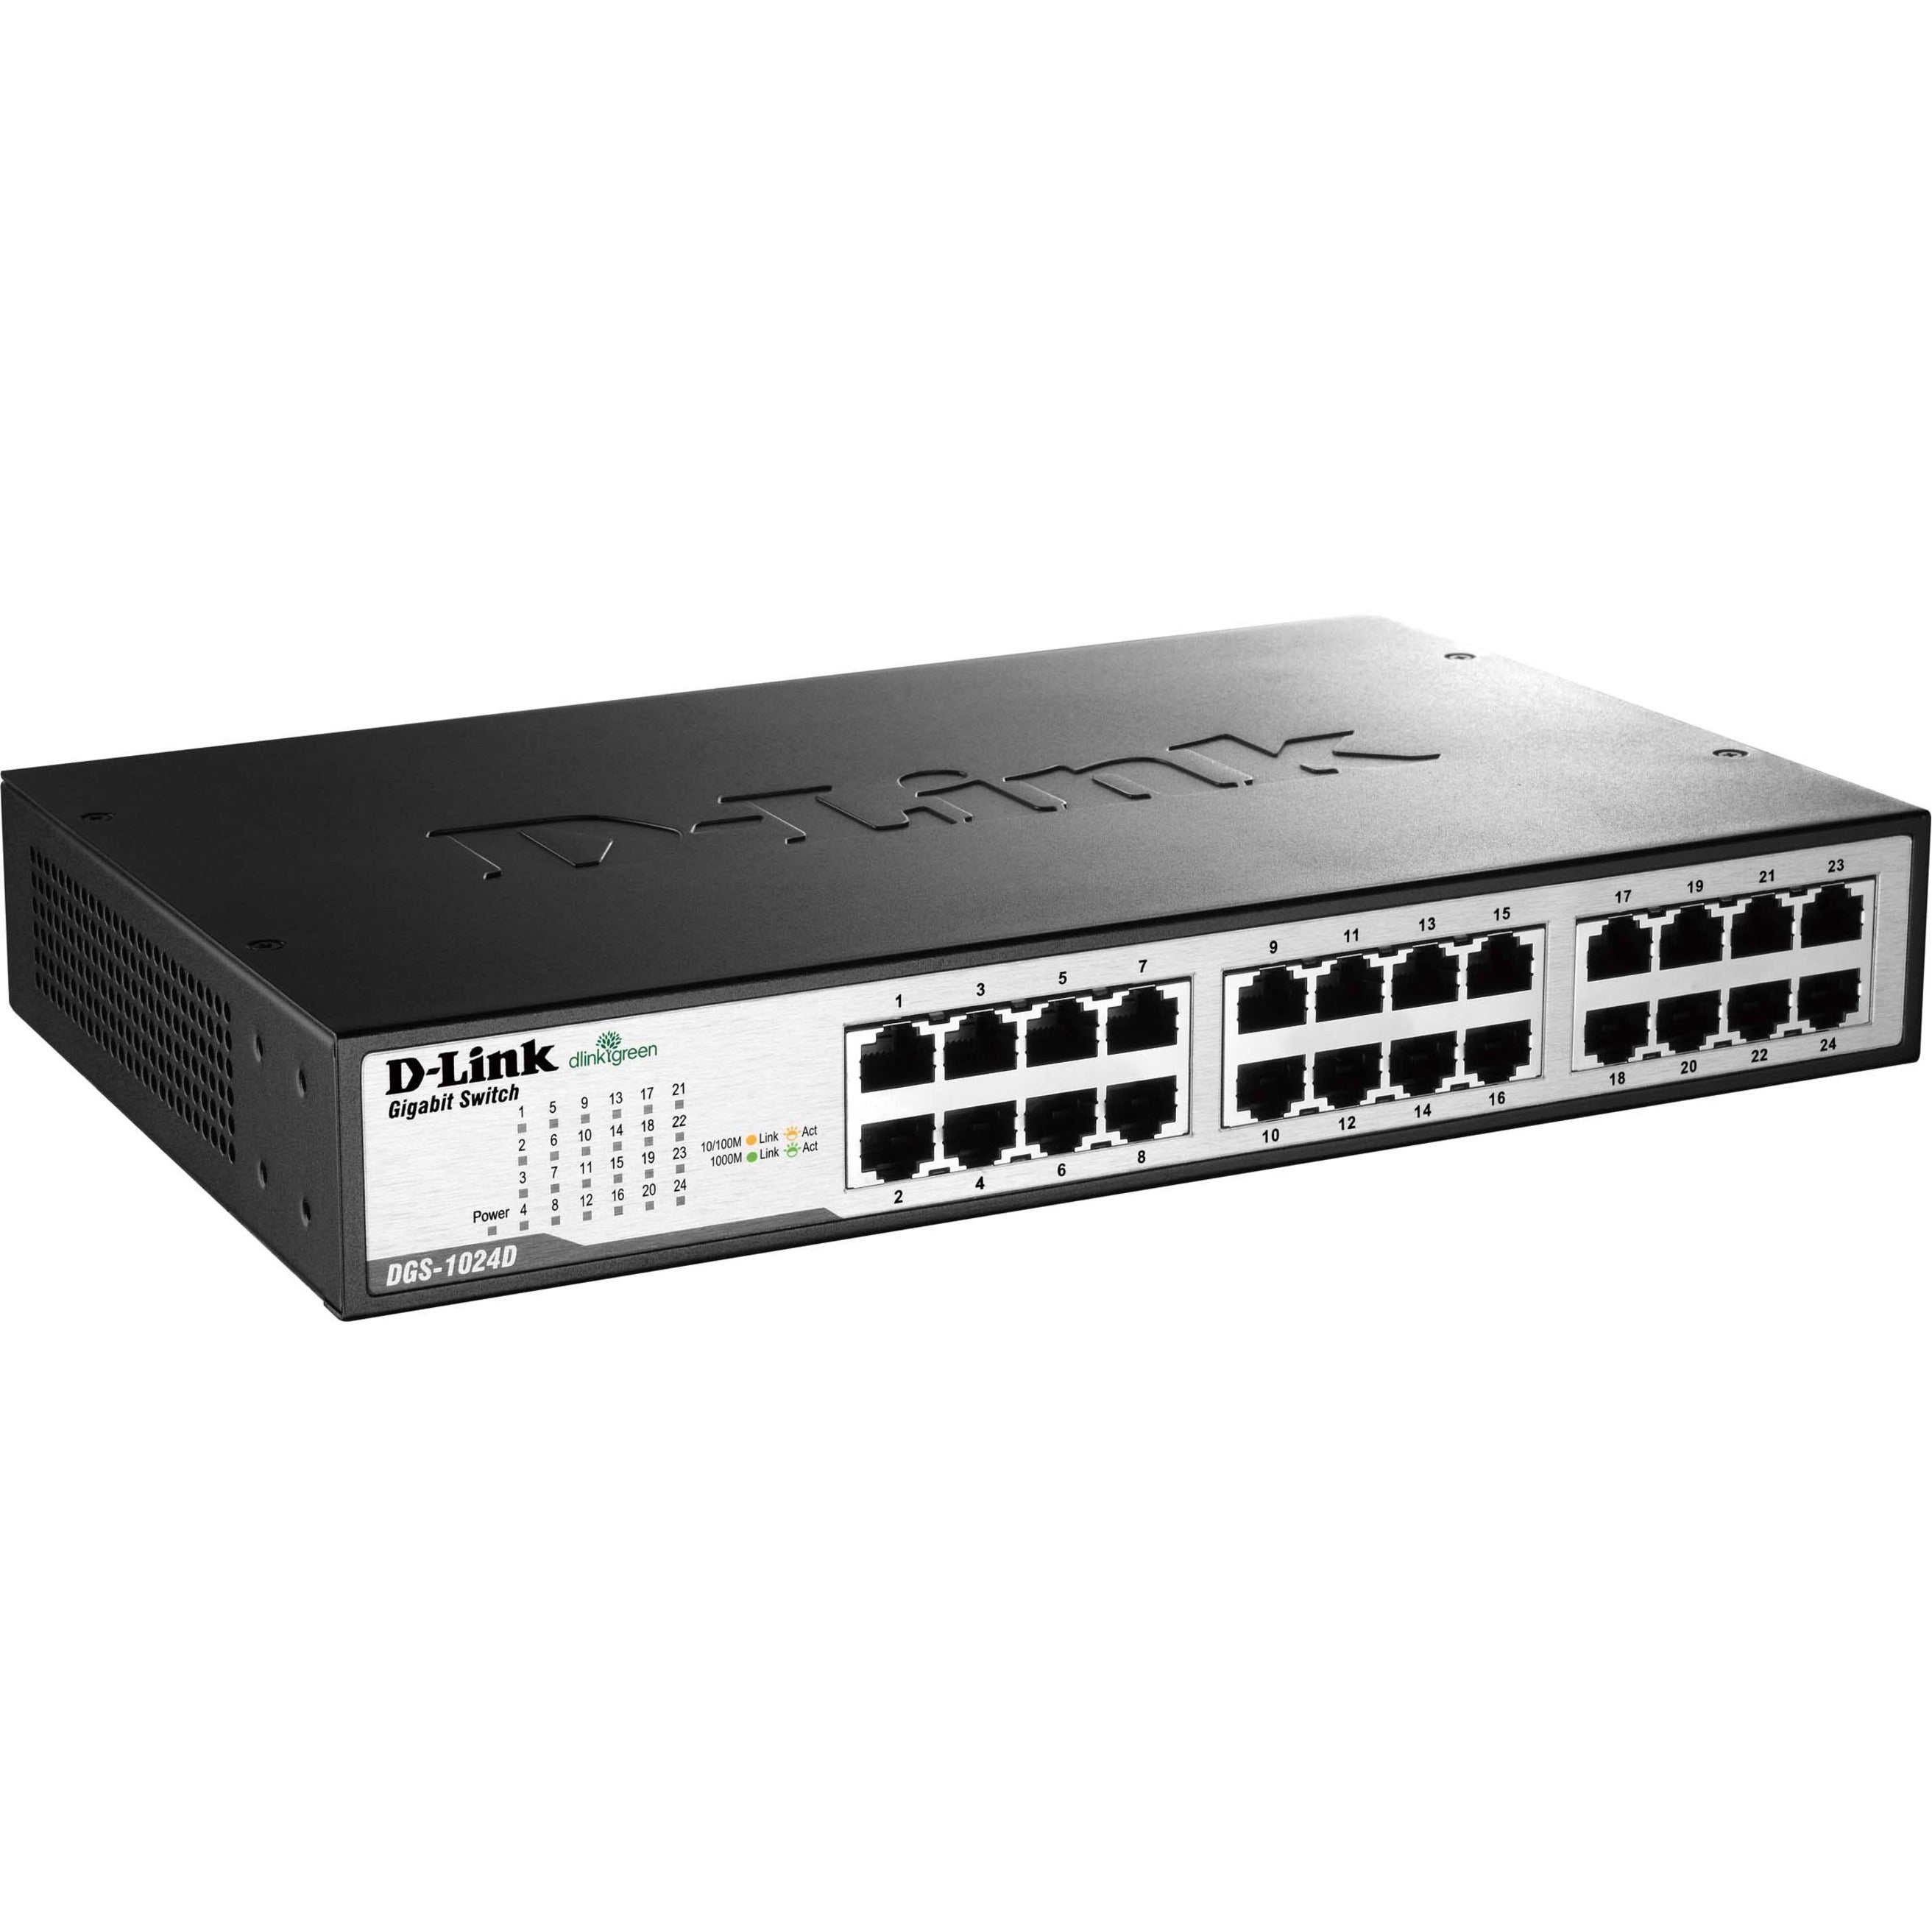 D-Link DGS-1024D Ethernet Switch, 24 Port 10/100/1000Mbps Unmanaged Layer 2 Switch